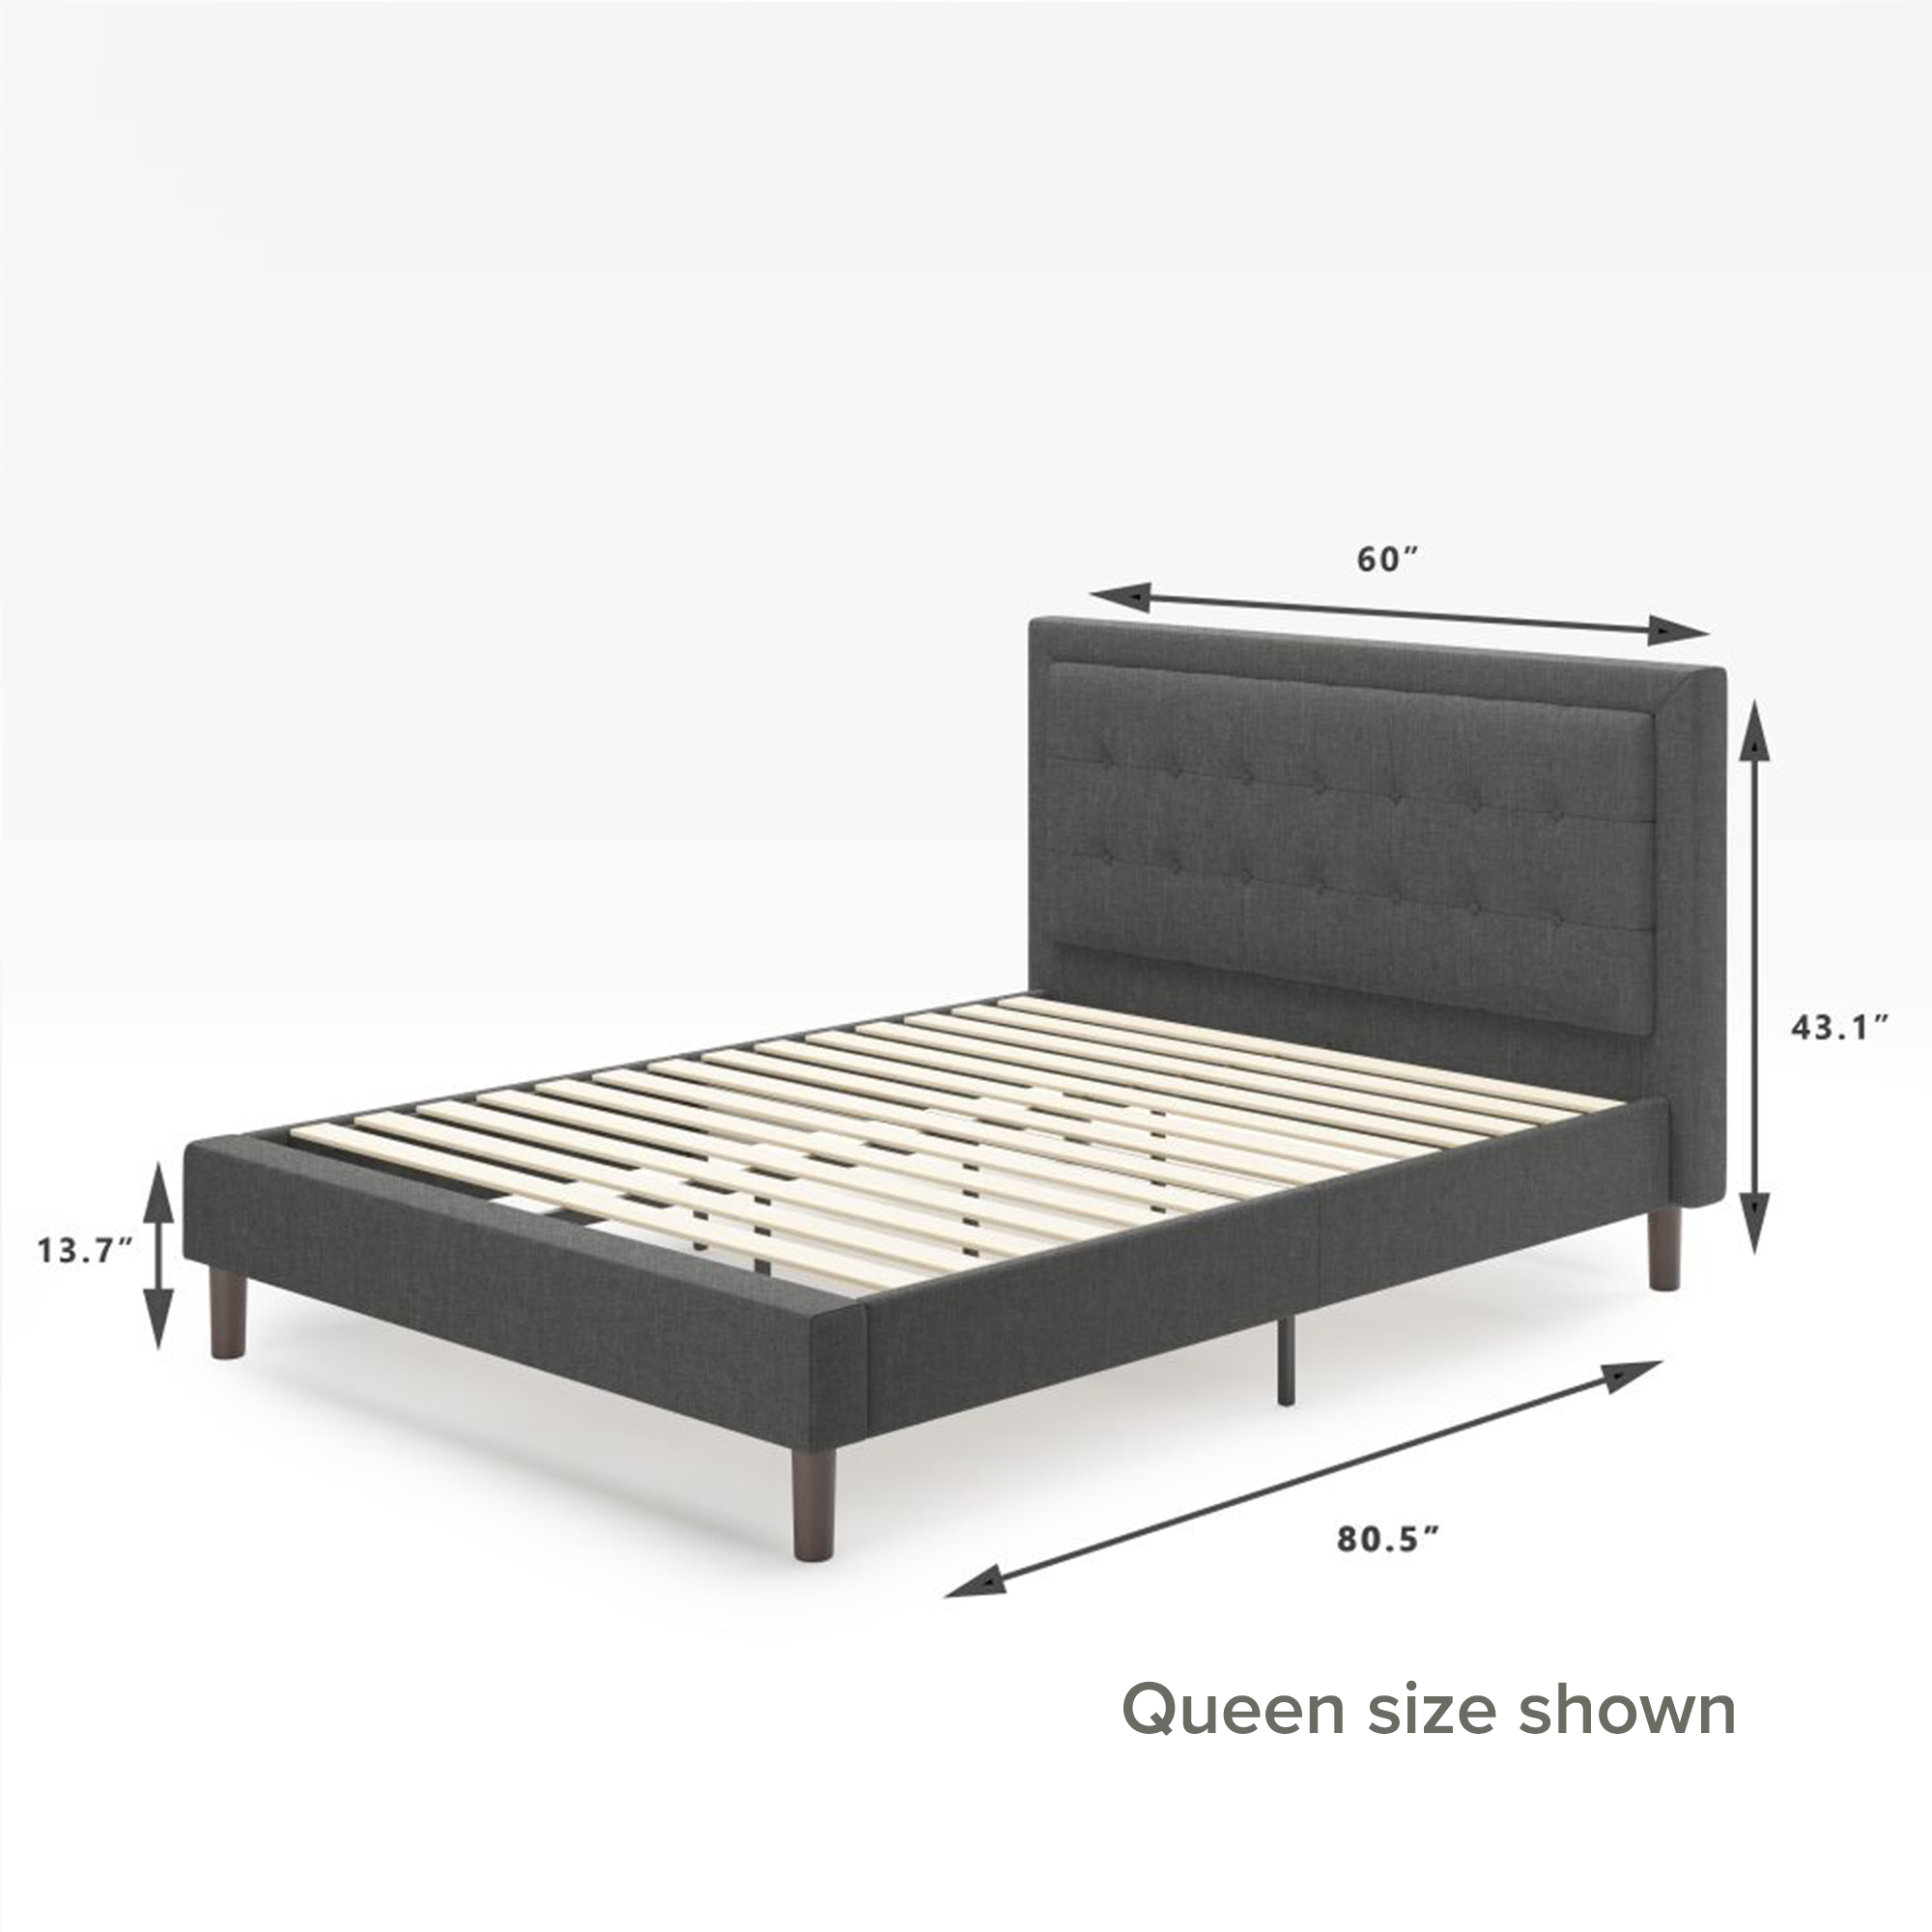 dachelle upholstered platform bed frame queen size dimensions